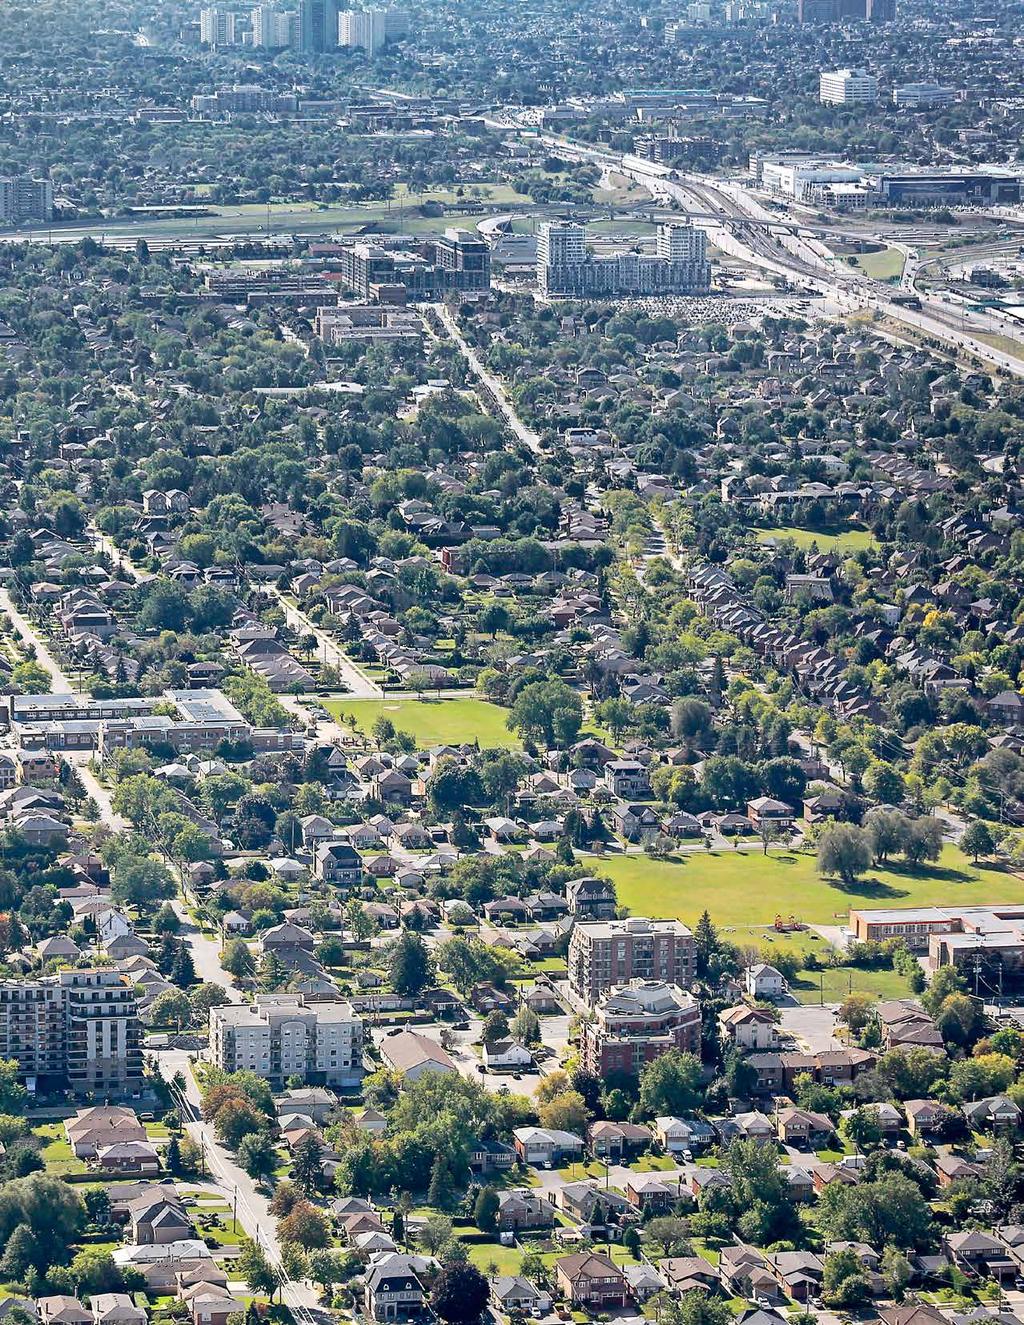 The Official Plan Amendment and Rezoning applications were officially approved by the City of Toronto in August 0.